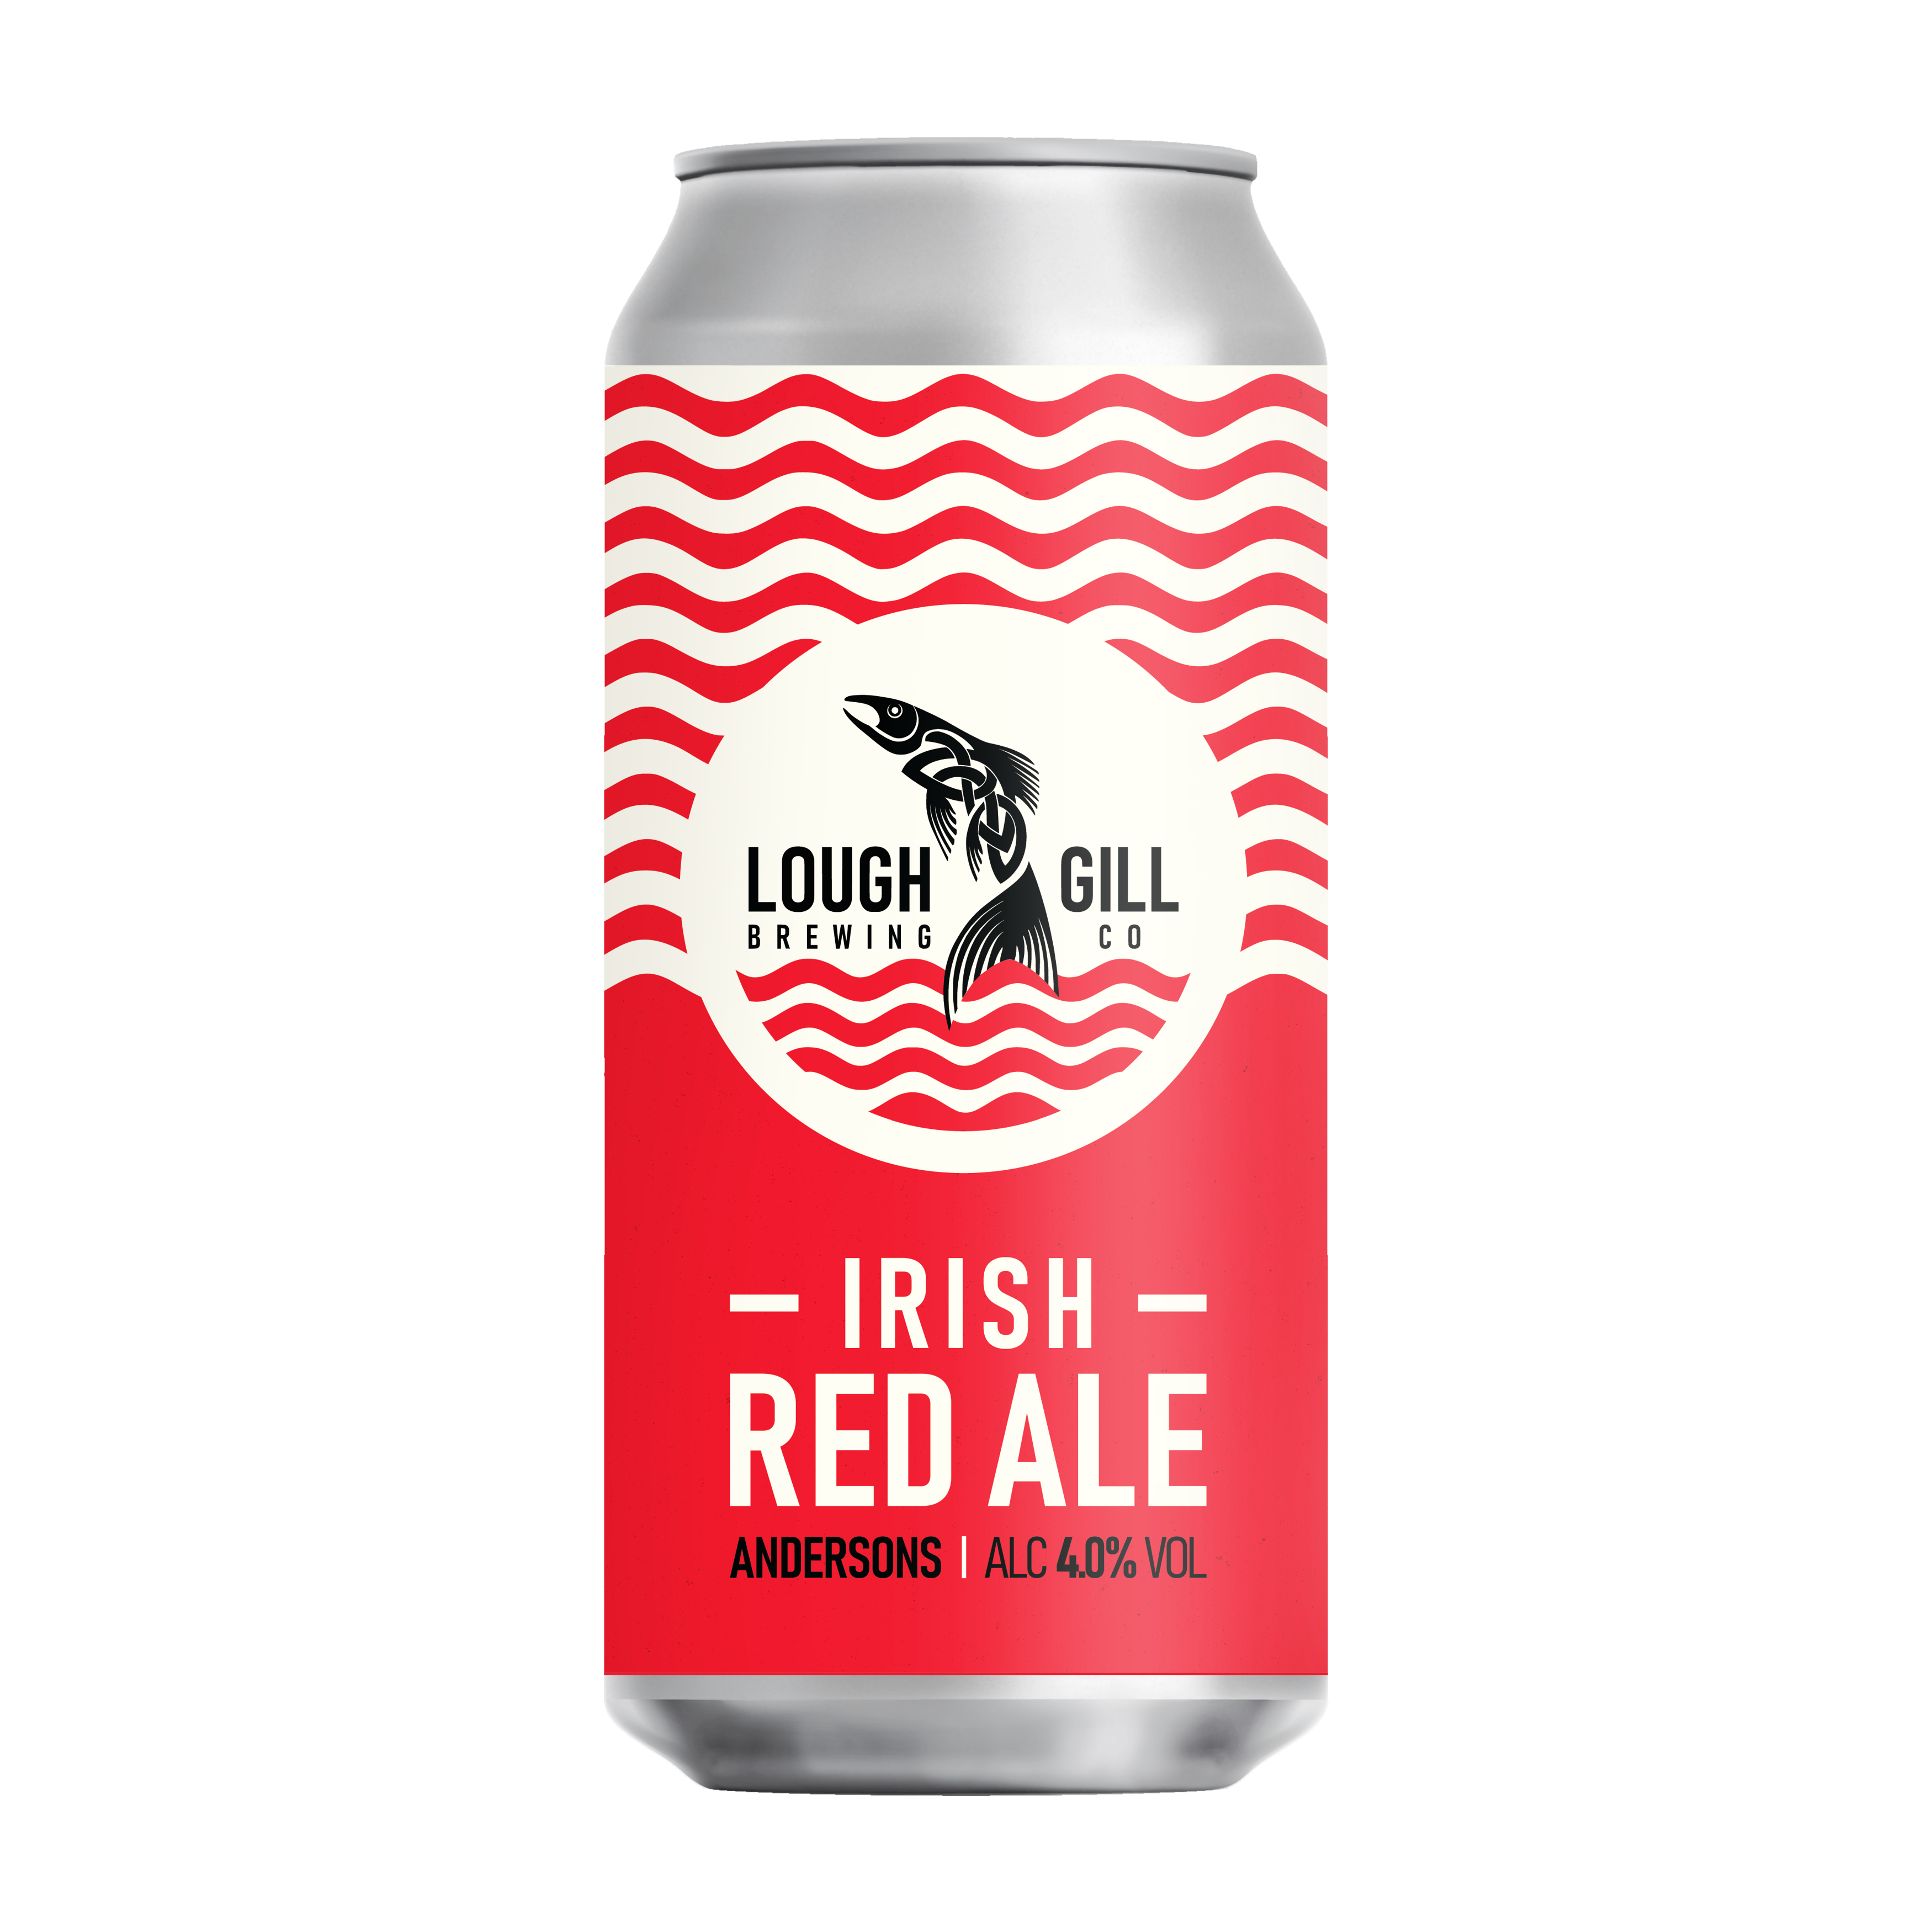 andersons irish red ale can mockup 440ml